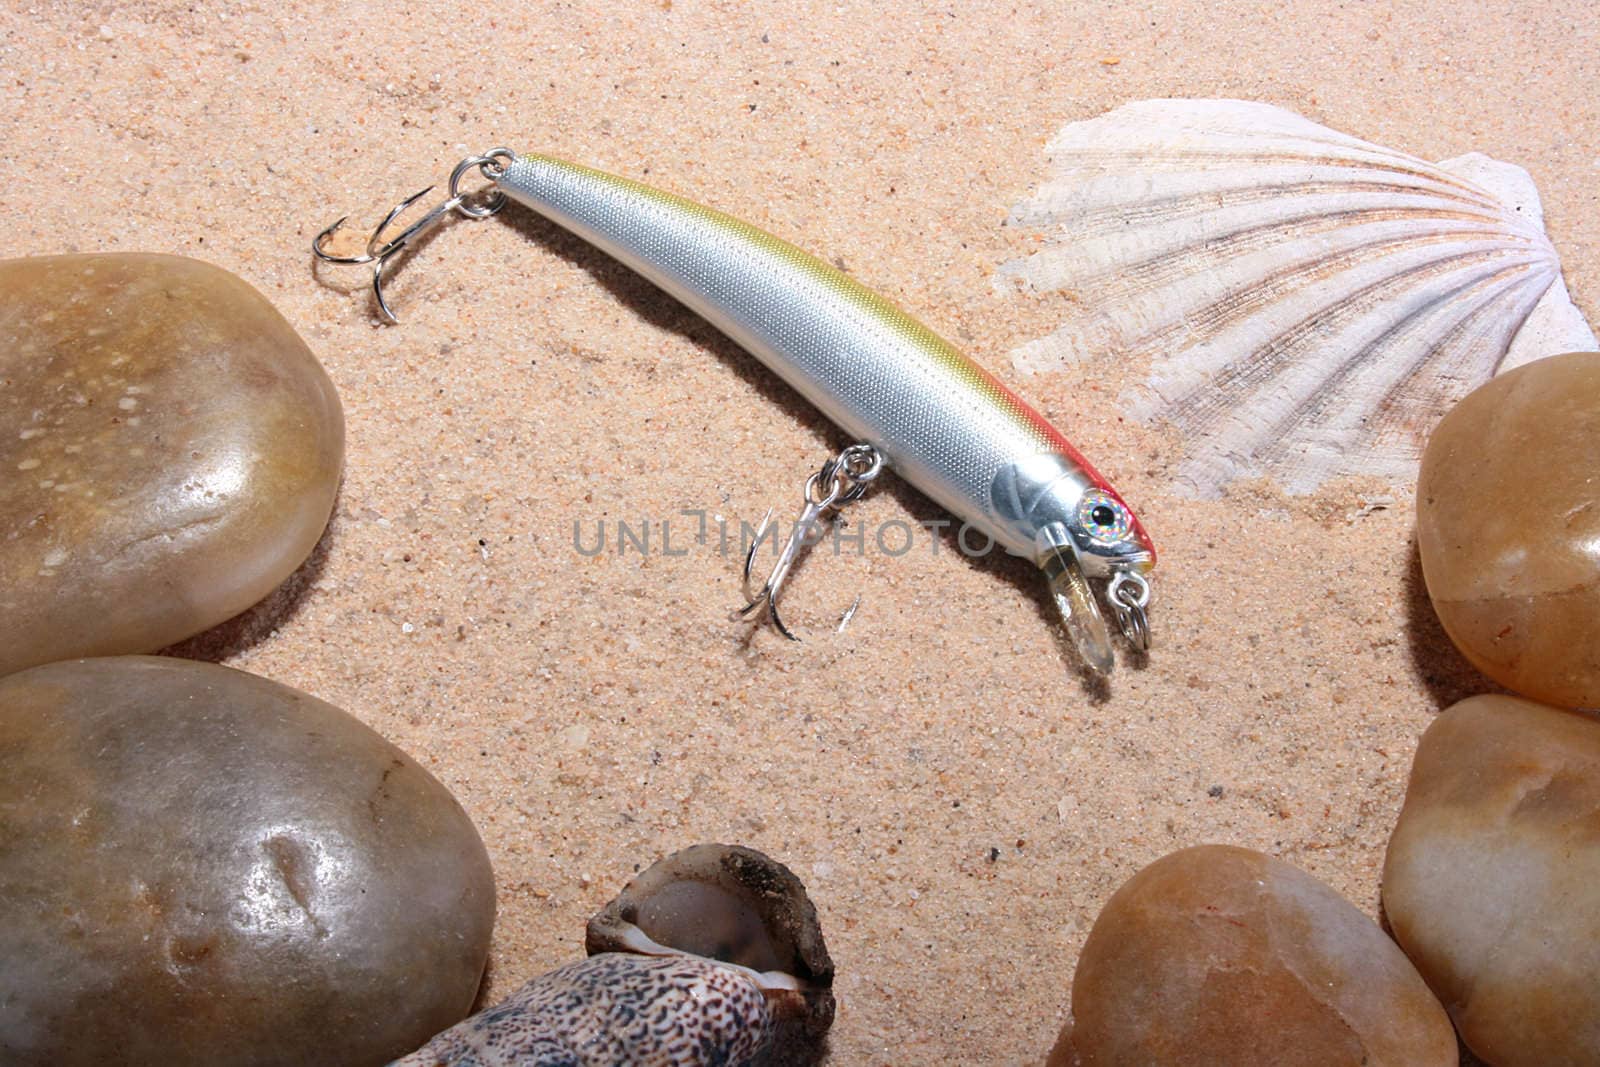 Artificial small fish - a bait for fishing in the rivers, the seas and lakes on sand with a cockleshell and pebbles.